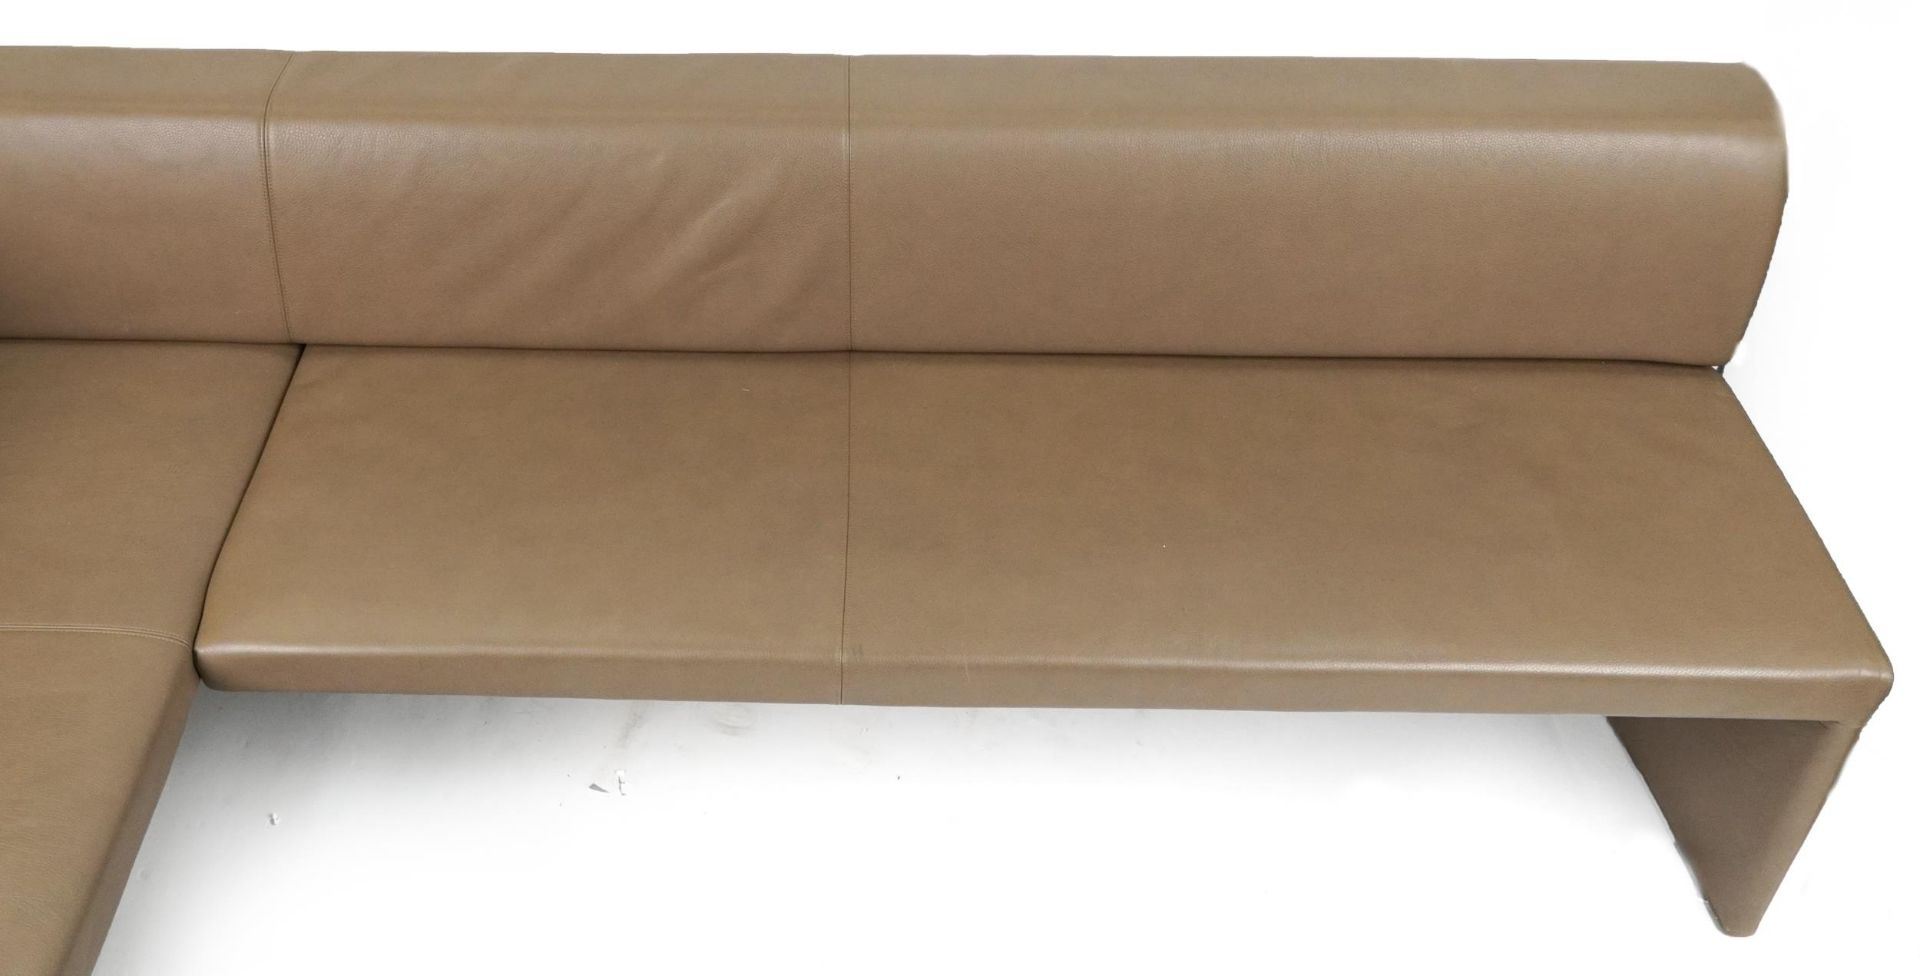 Contemporary Walter Knoll 290 corner seat bench settee with caffe latte leather upholstery, 77cm H x - Image 4 of 7